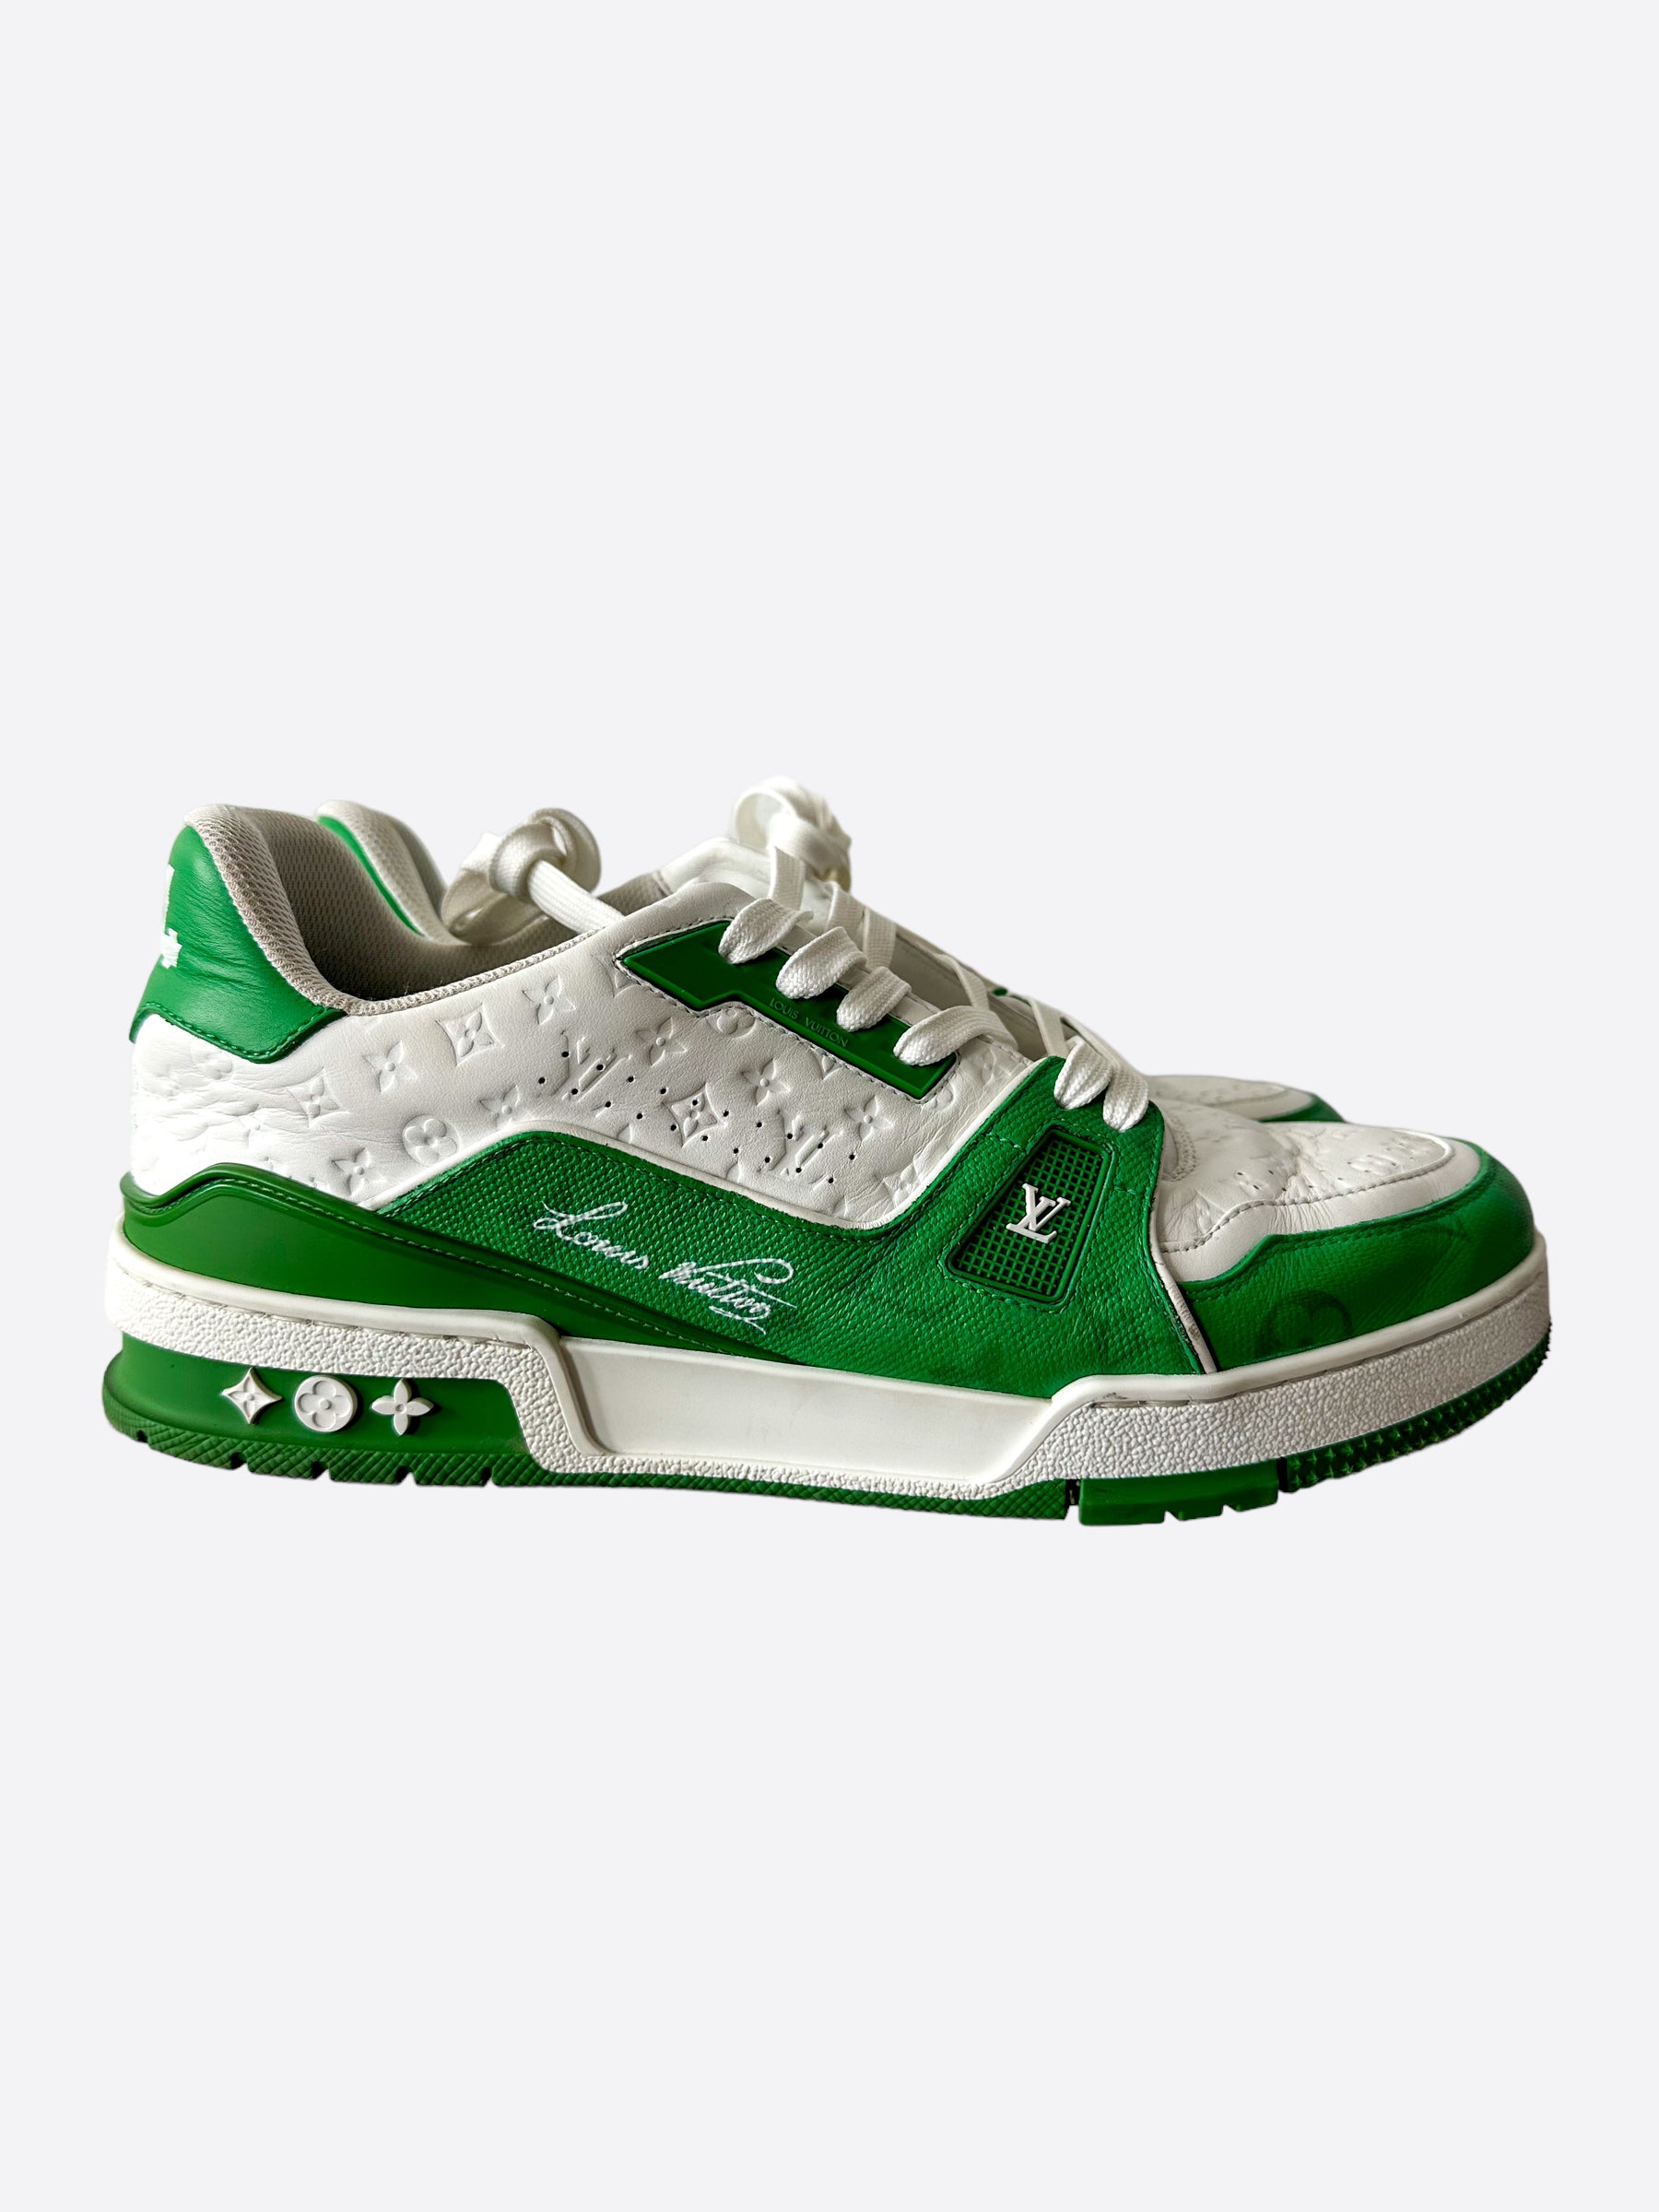 New 2022 Louis Vuitton LV Trainer Sneaker Green Monogram Leather